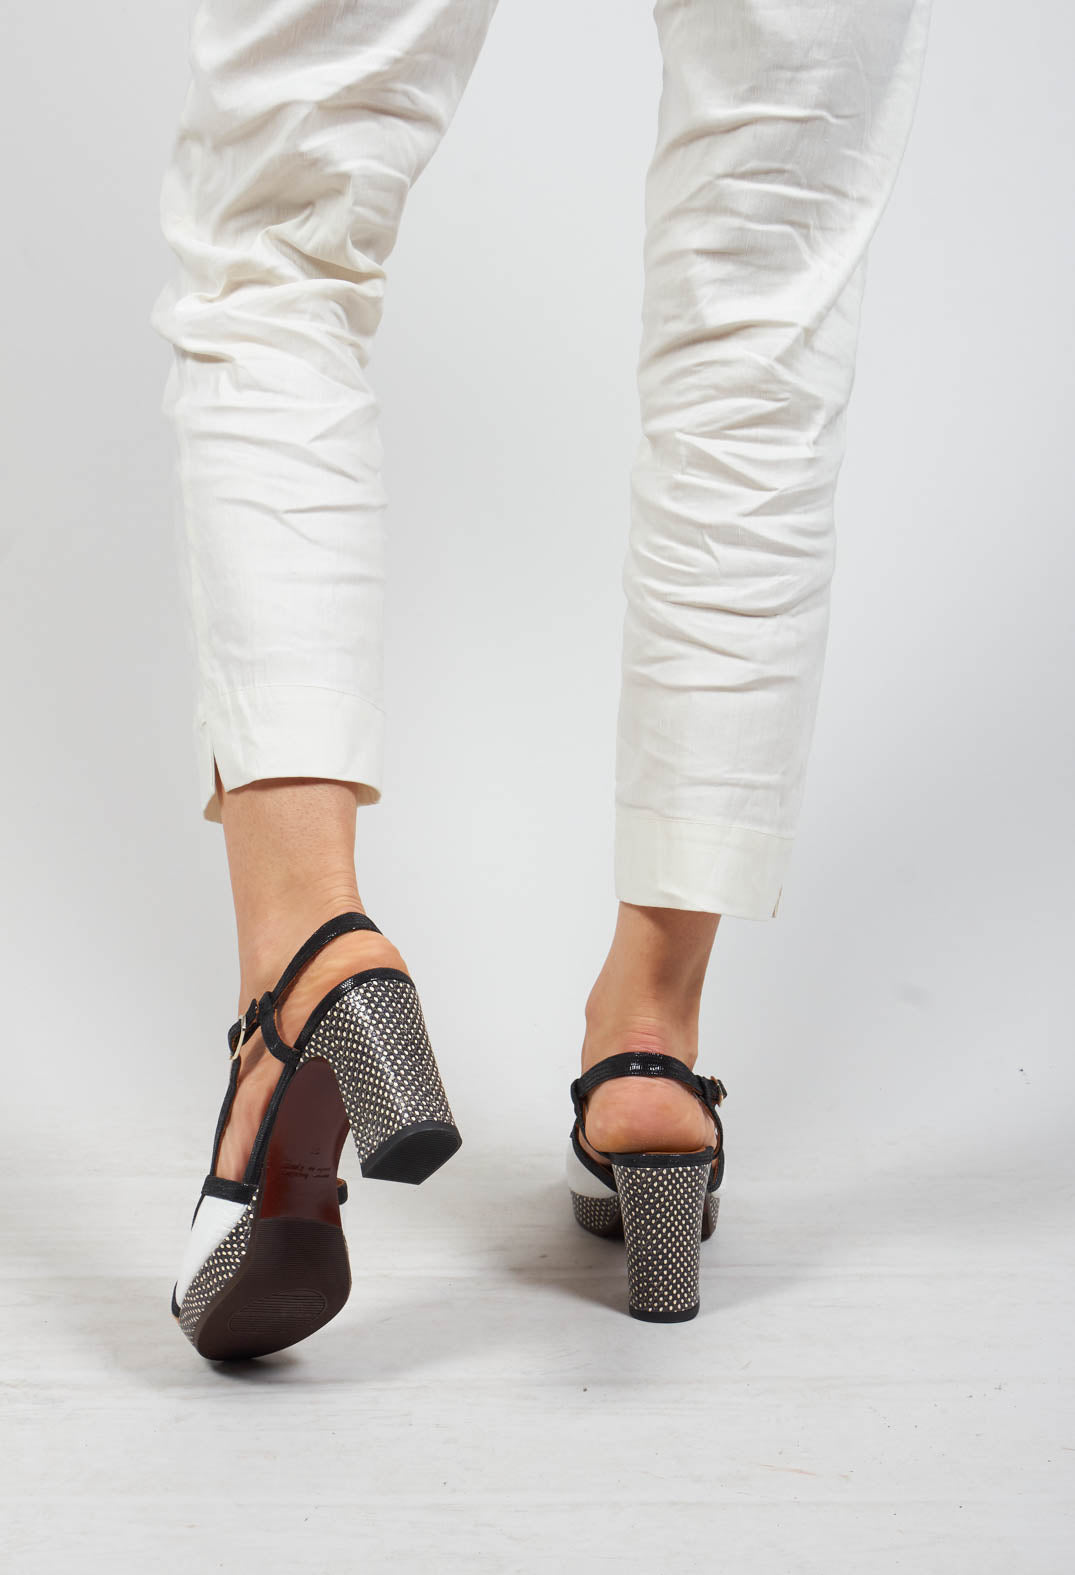 Heeled Sandal with Contrasting Detail in Black and White